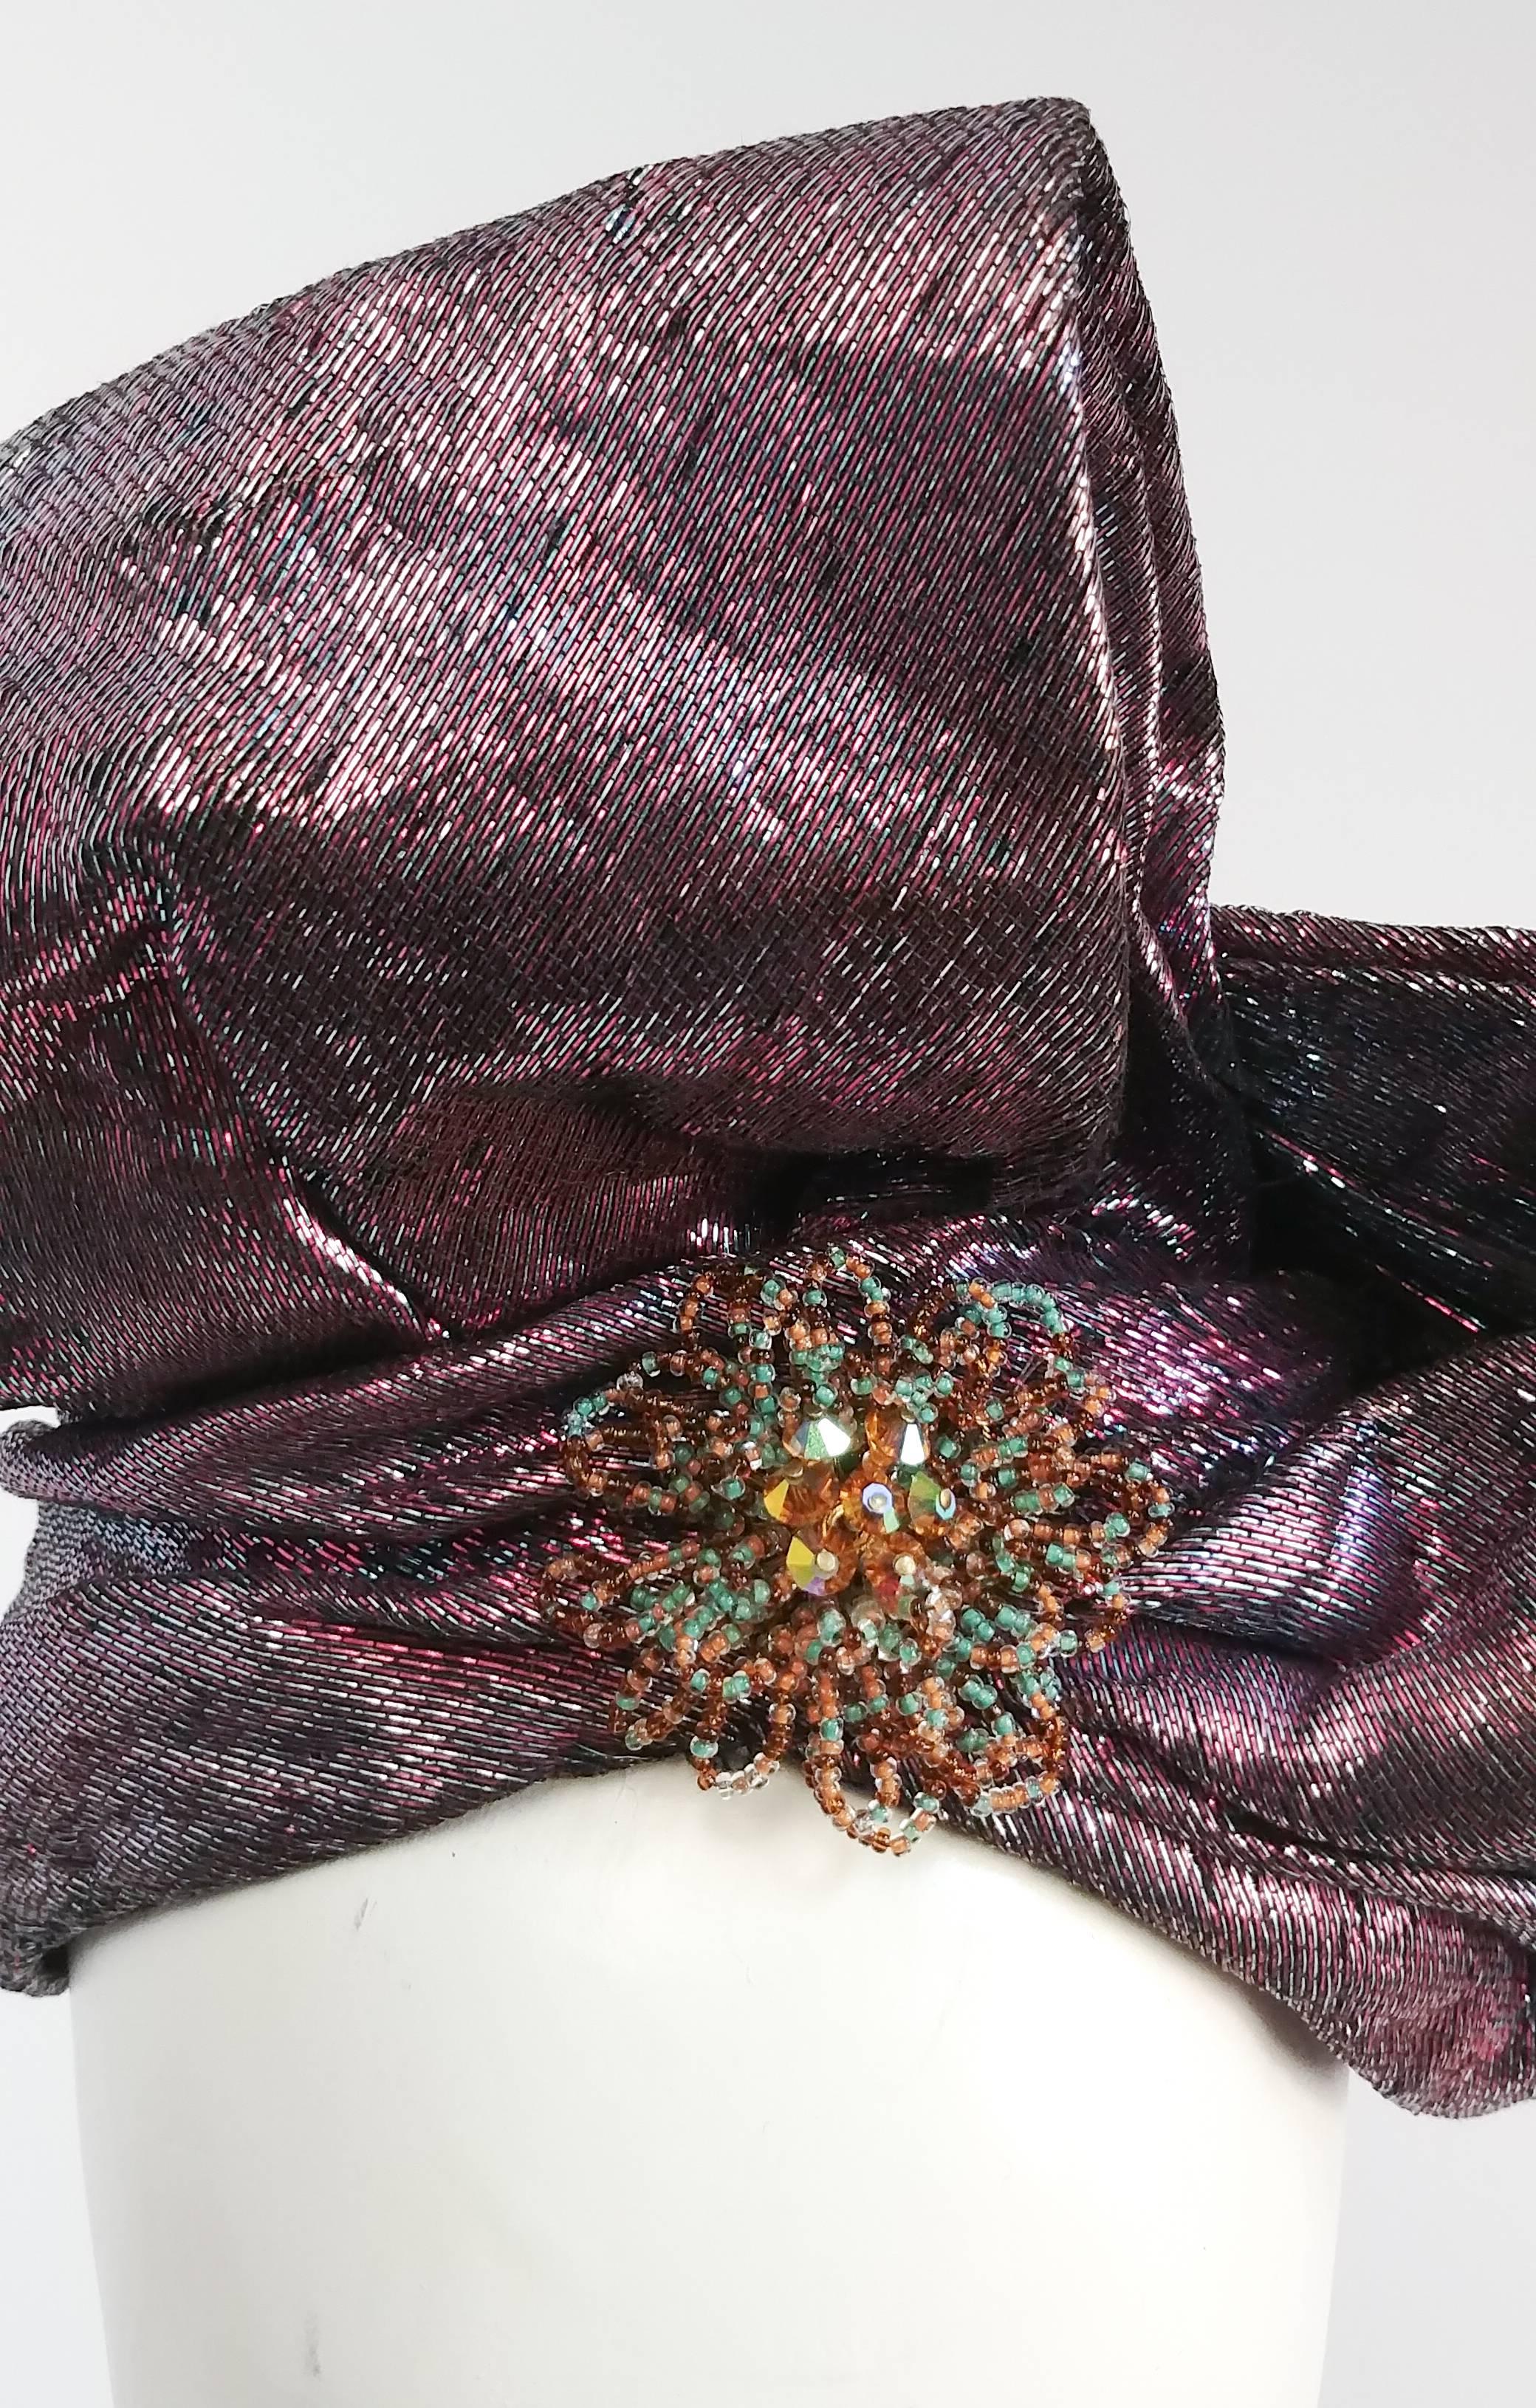 1980s Metallic Pink/Purple Wrapped Turban Hat w/ Bow. Metallic fabric has pink and green threads for duo tone reflect. Large ruched bow finished at center with green and copper beaded brooch. 